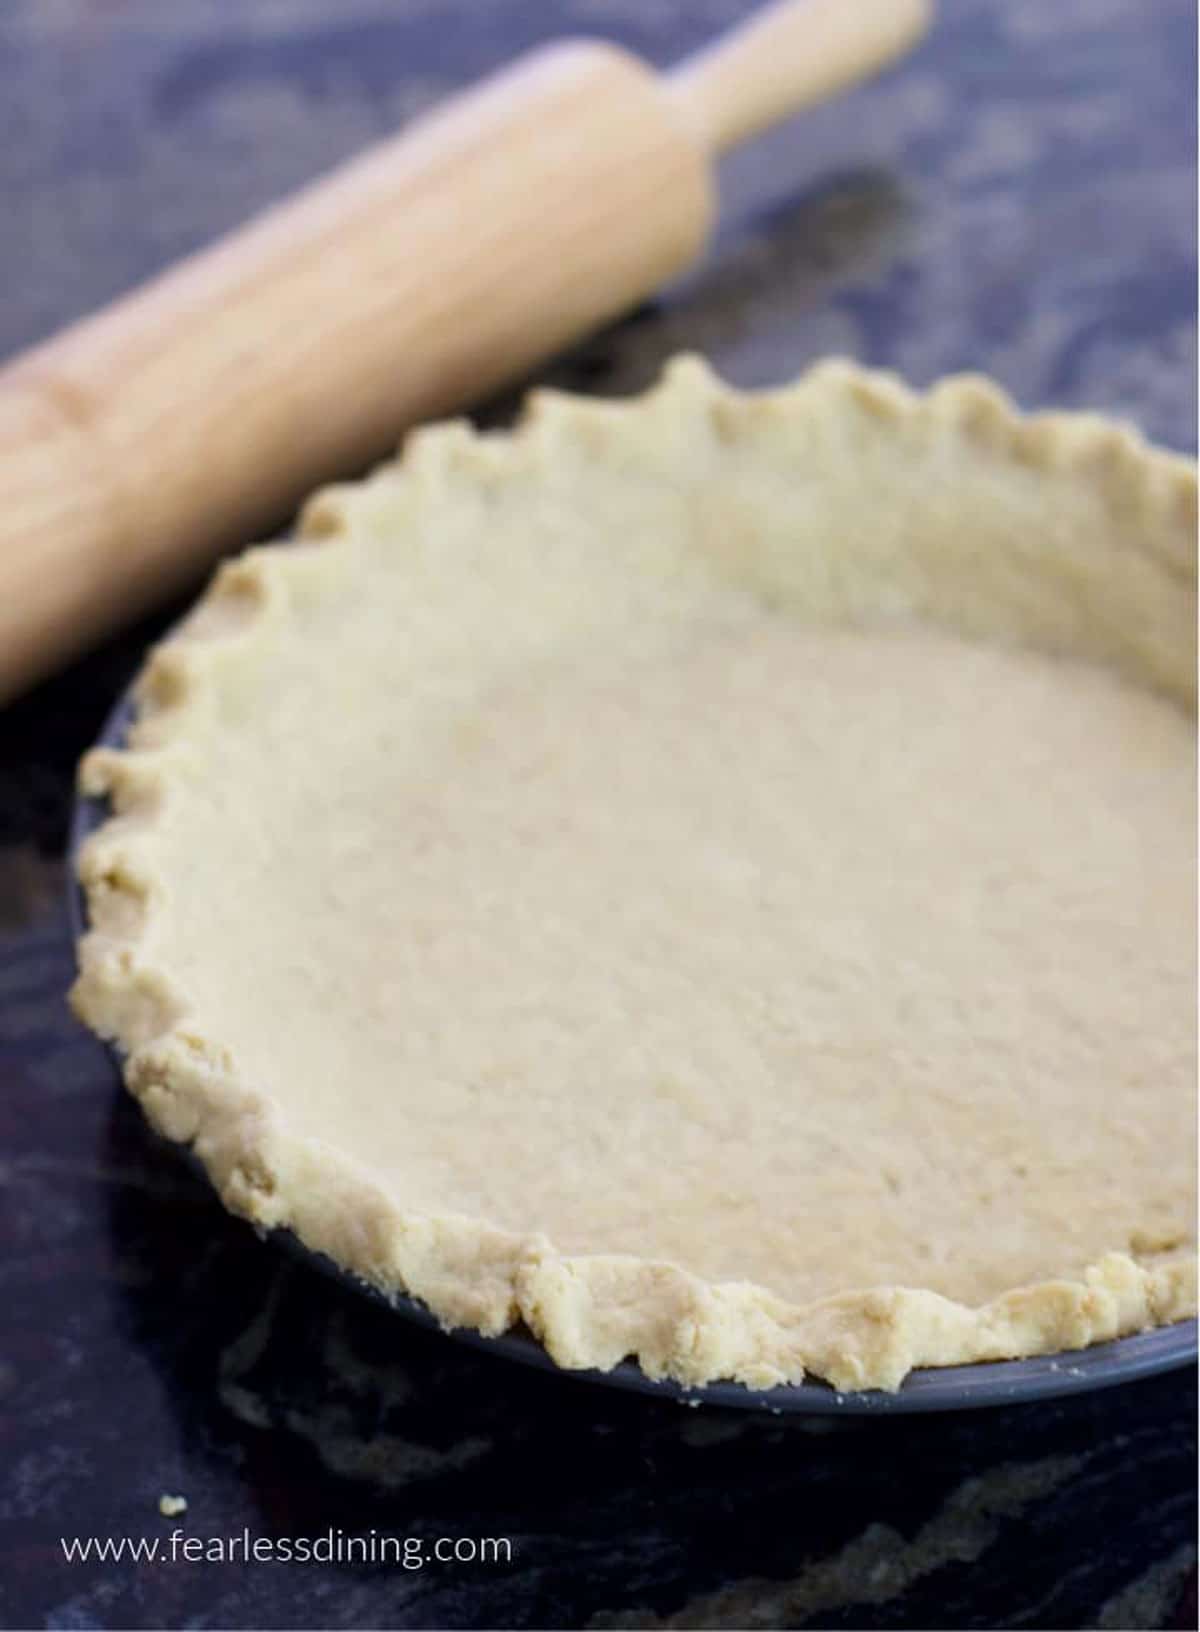 A baked gluten free pie crust on the counter.